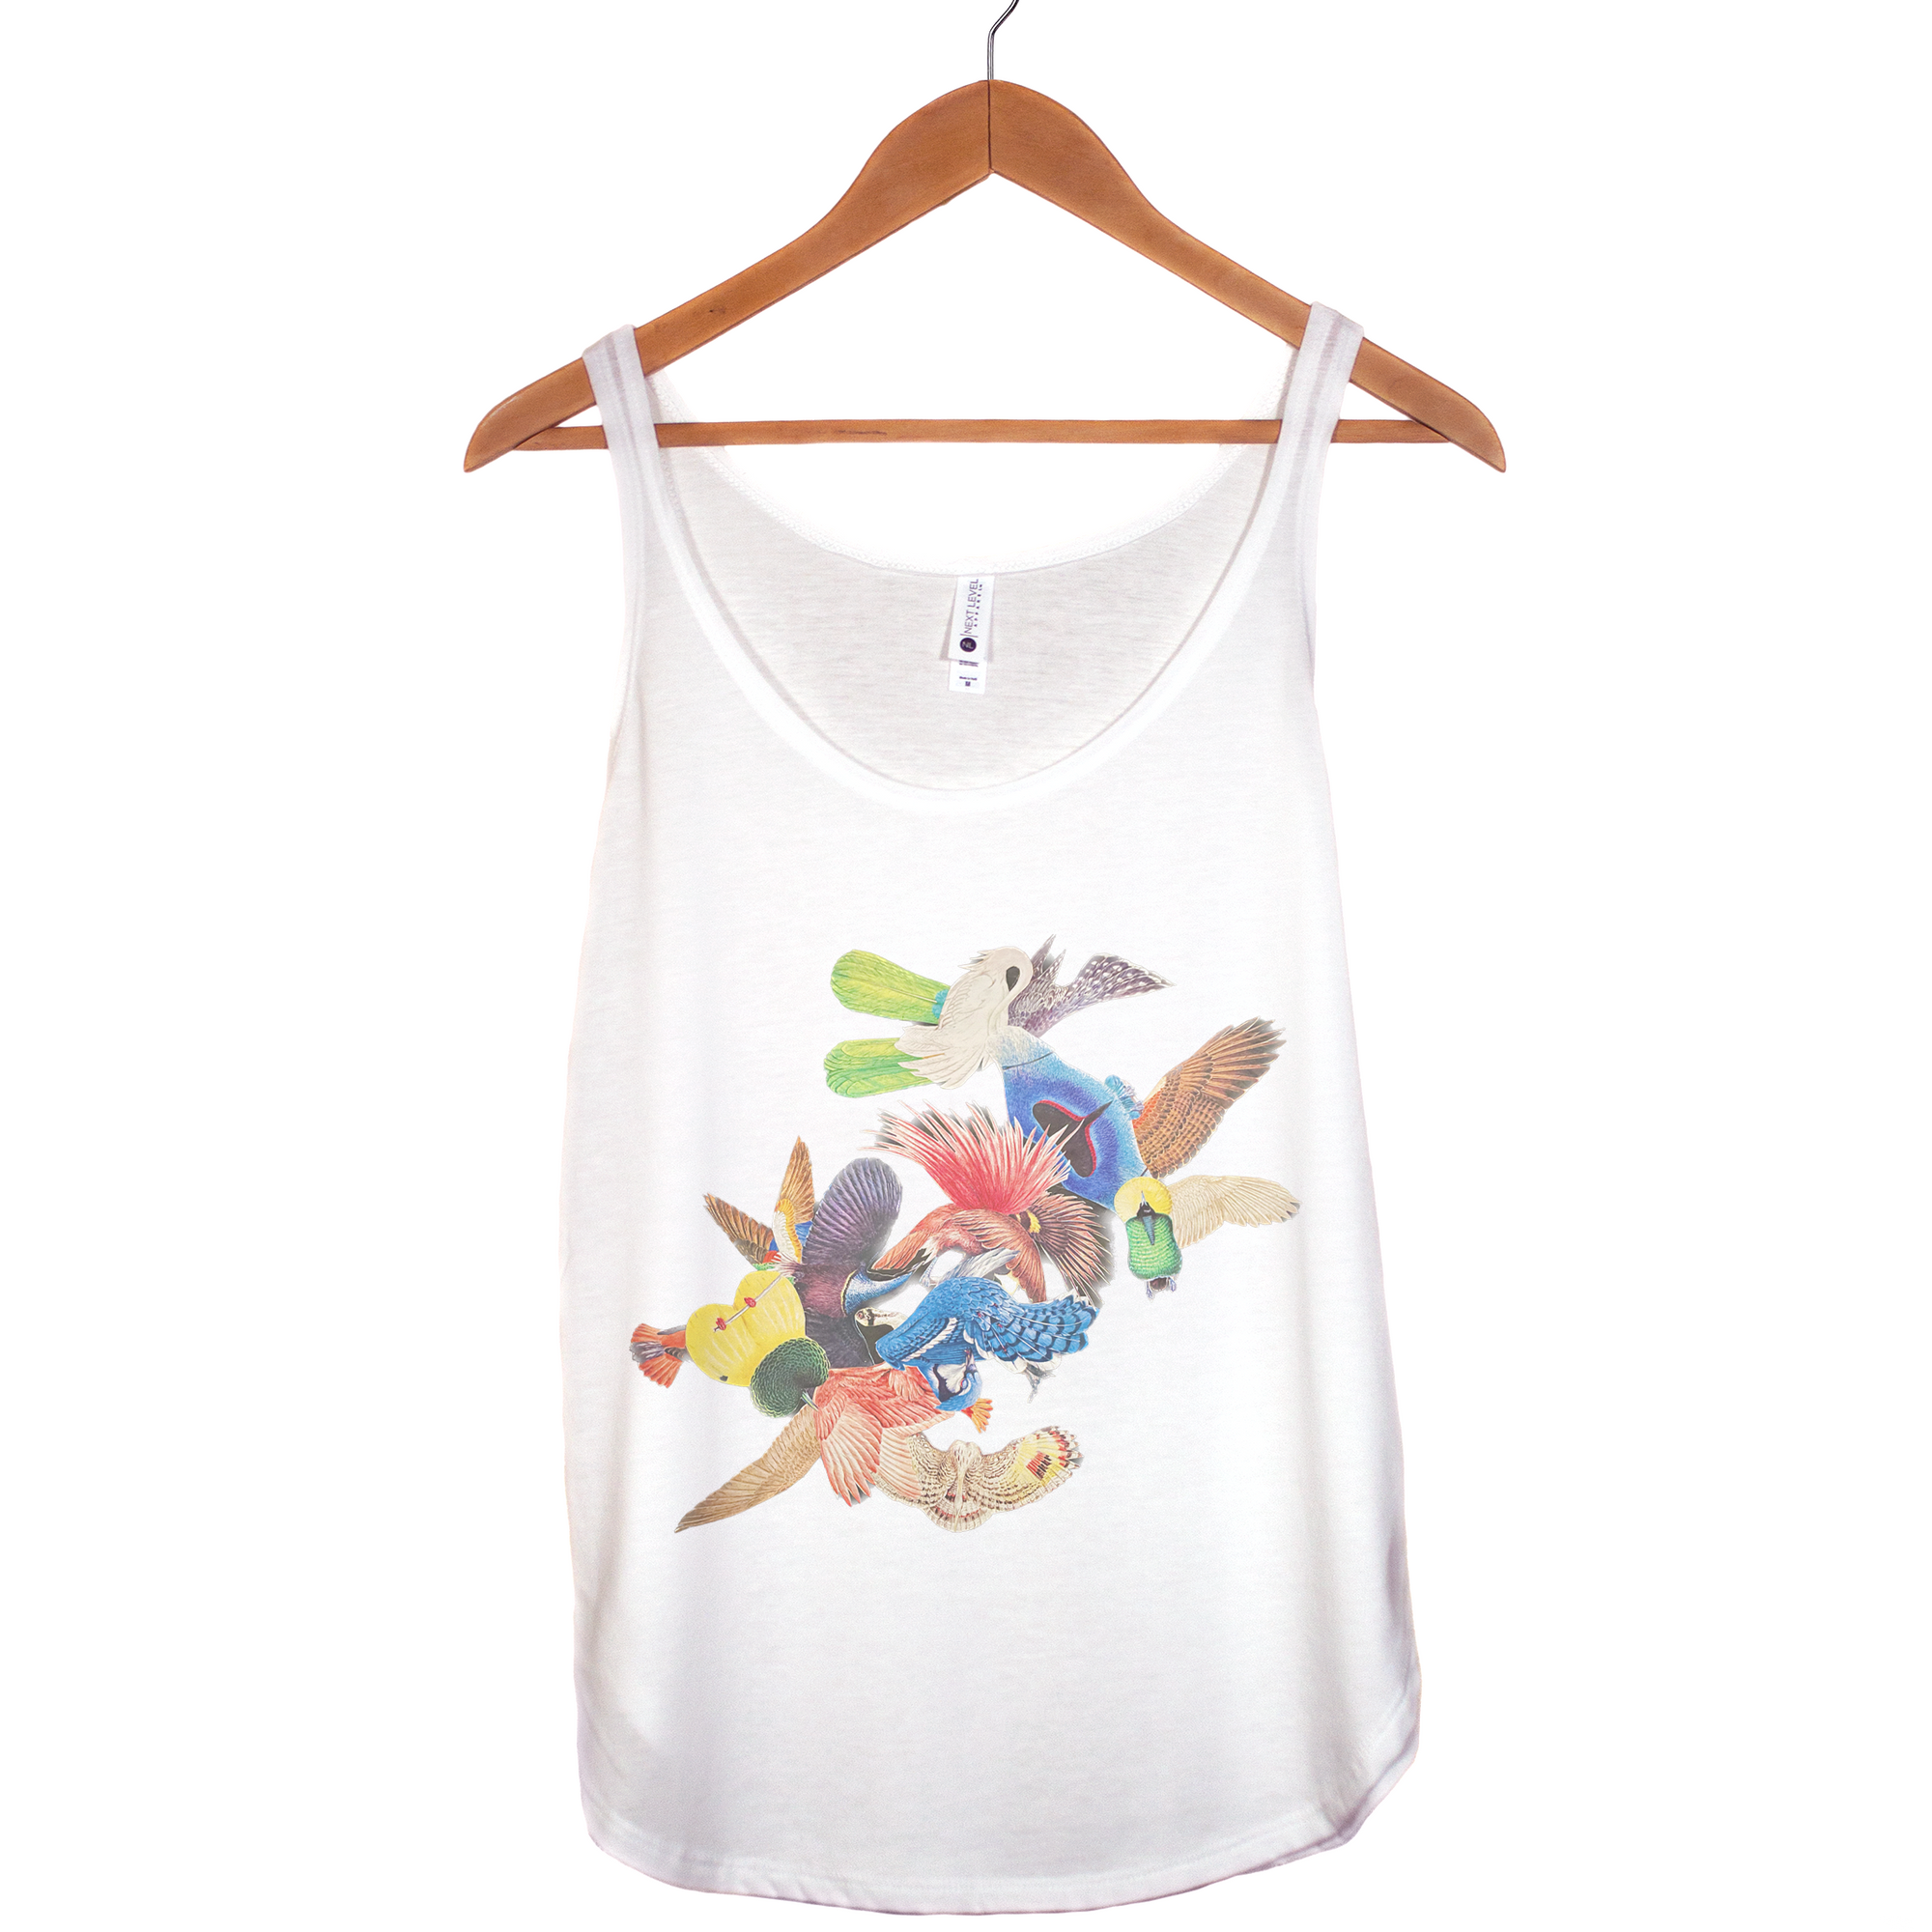 "Birds of a Feather" - Triblend Tank